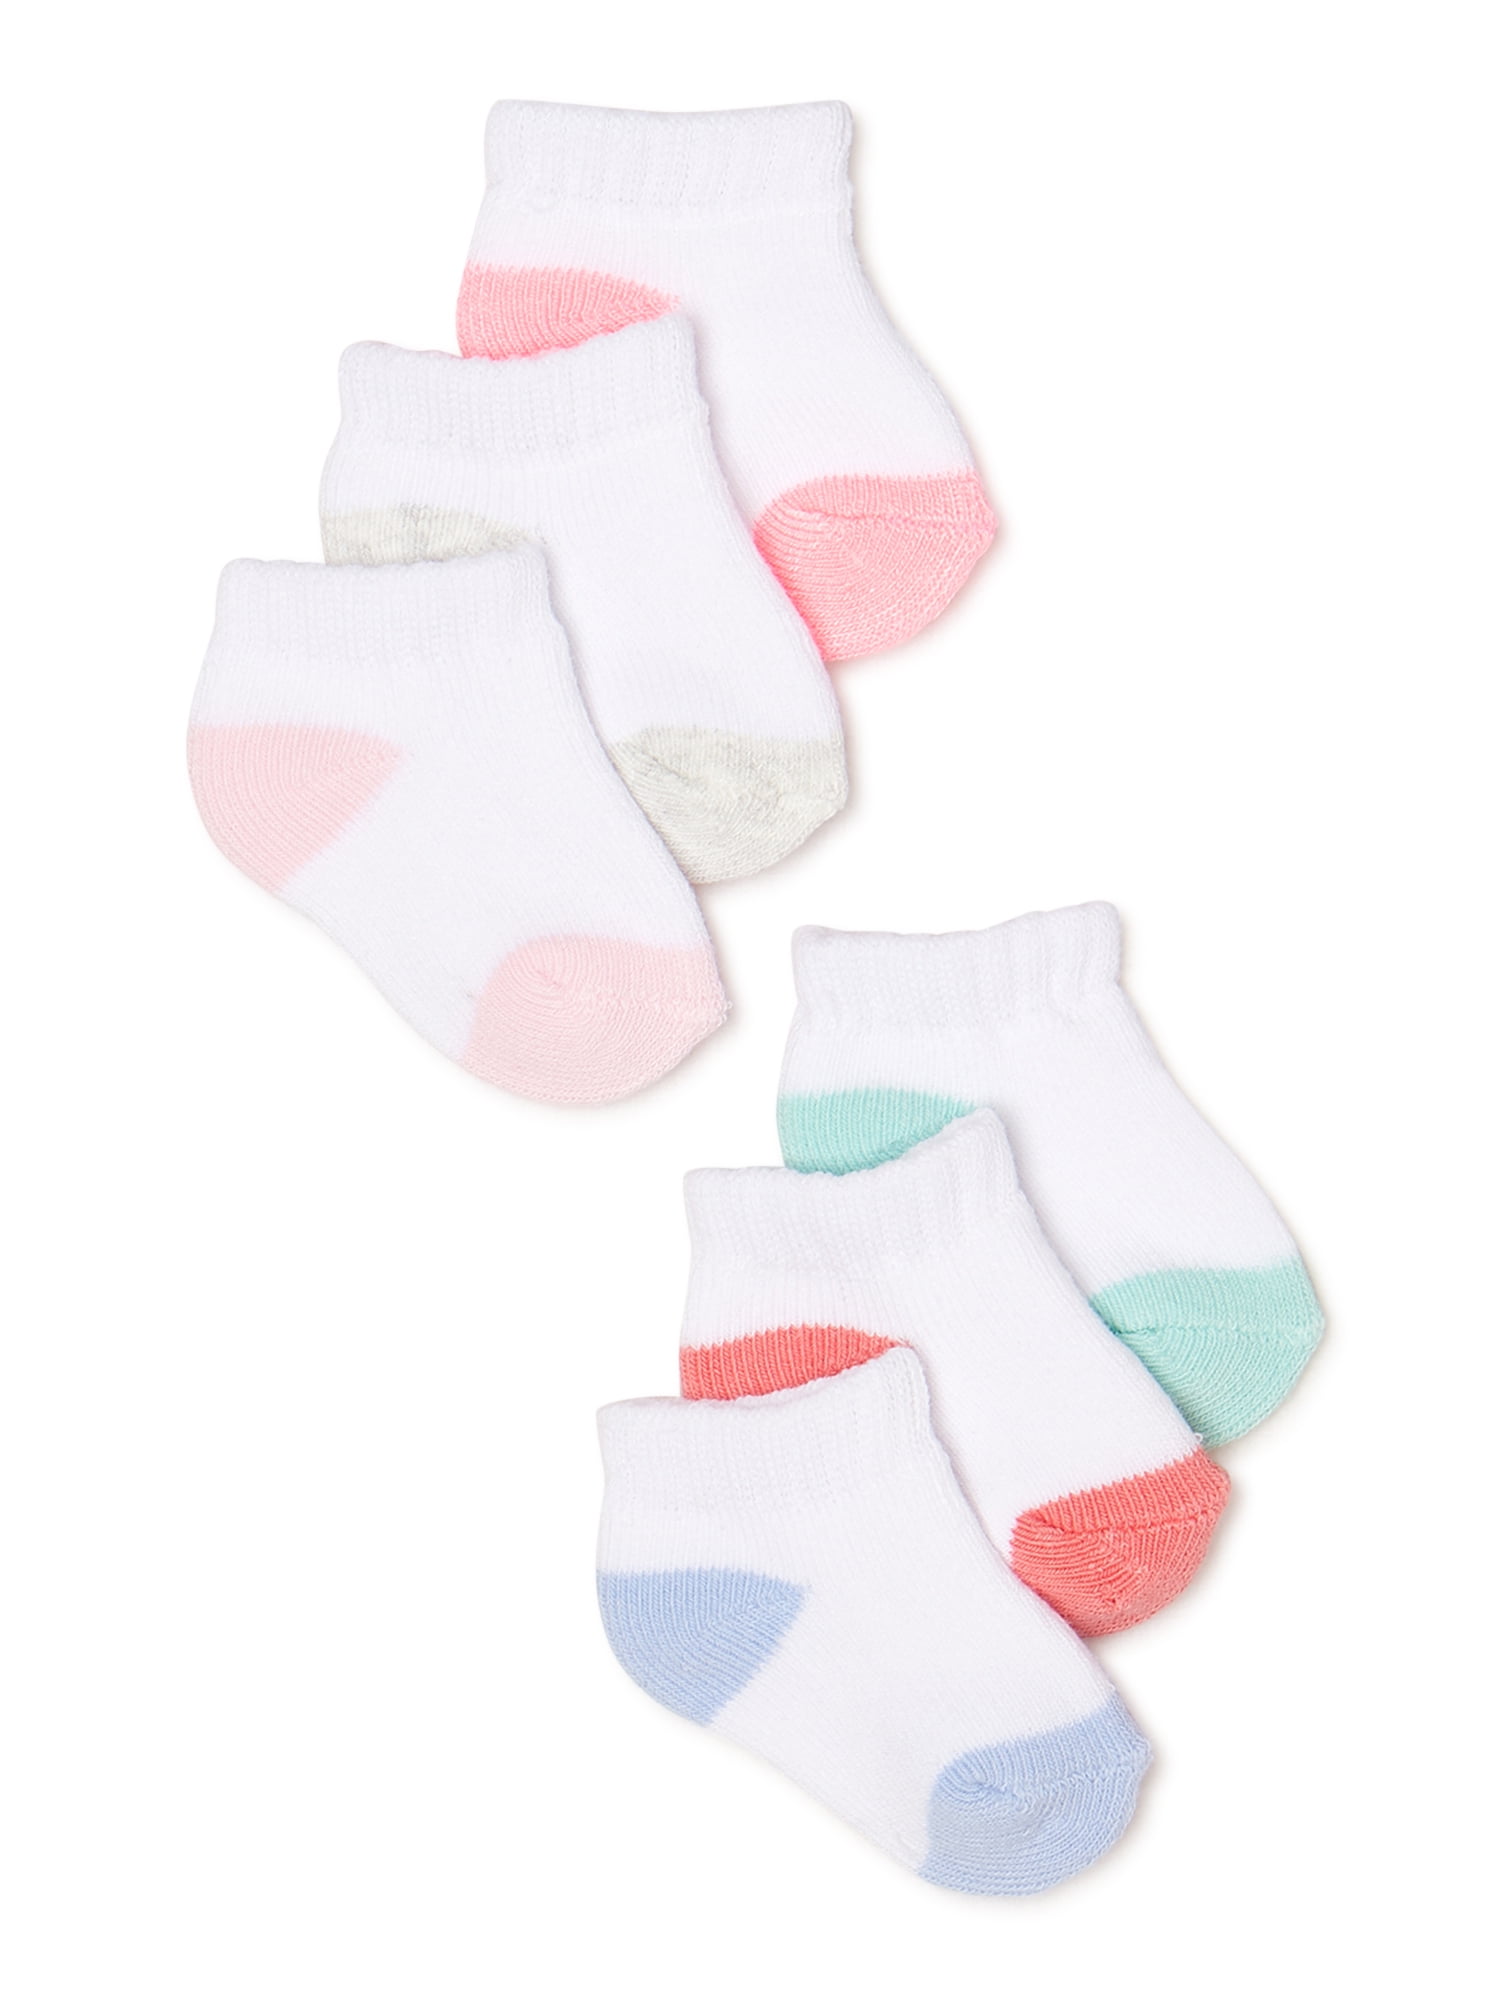 Carter's Child of Mine Baby Girls' Low Cut Terry Socks, 6 Pack ...